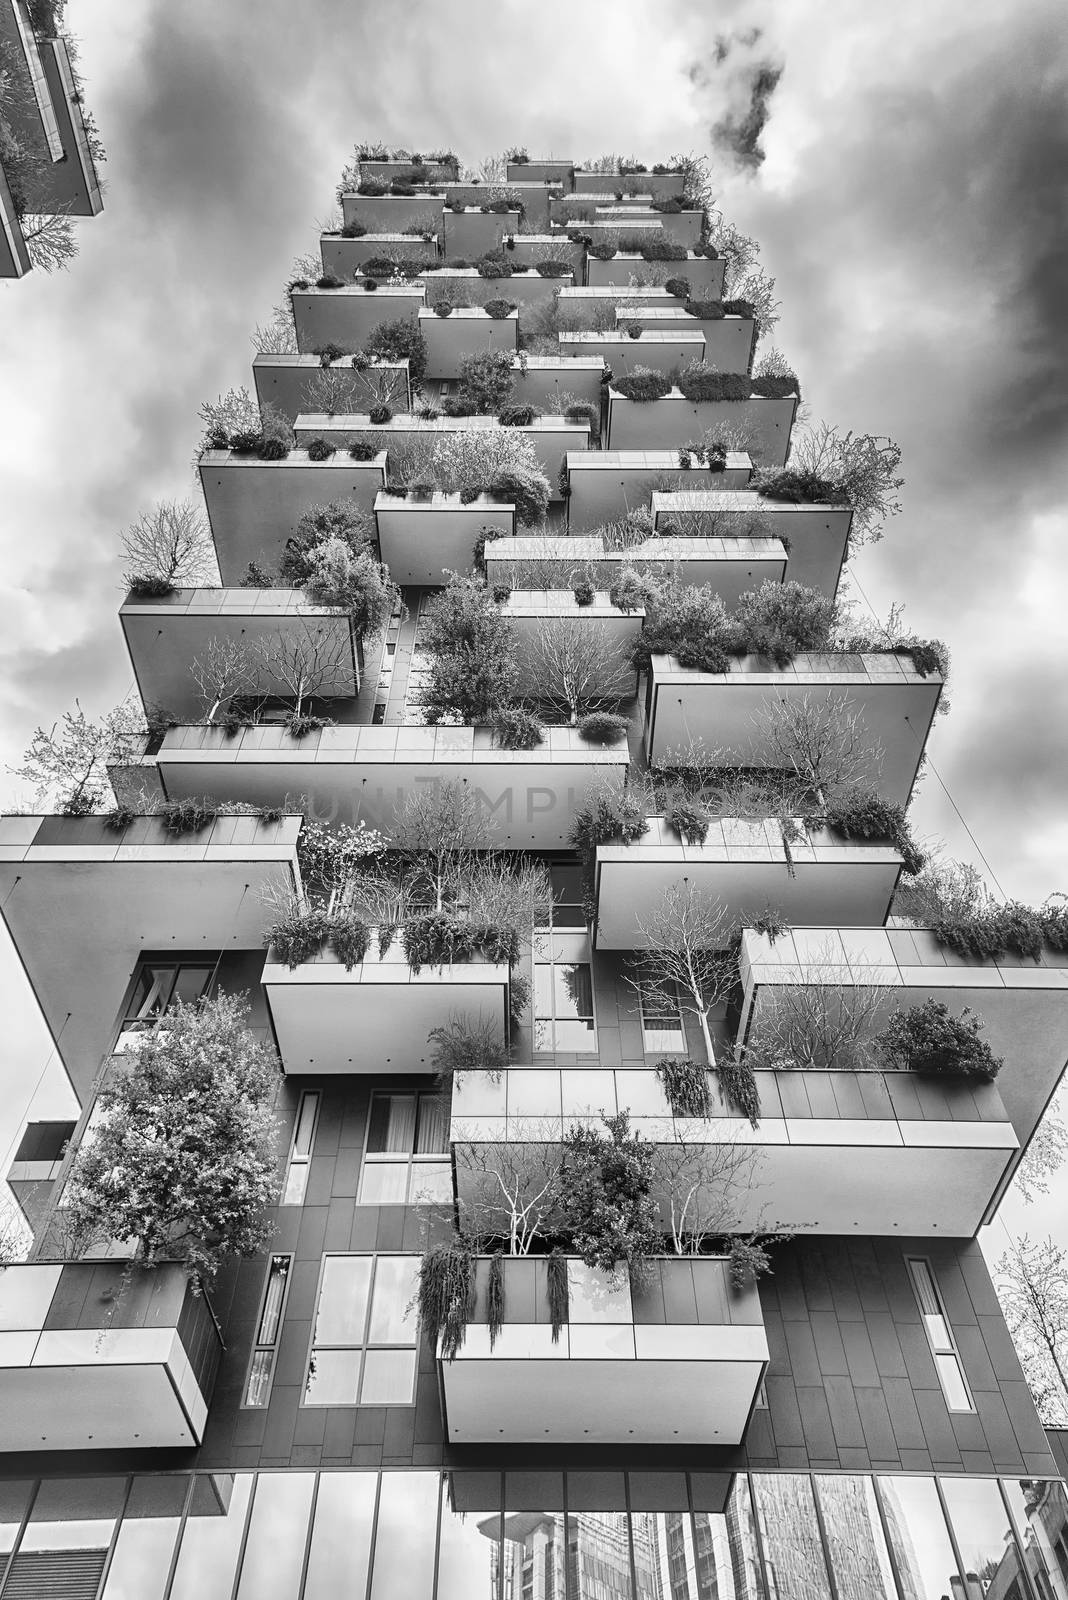 Bosco Verticale (Vertical Forest) iconic residential towers in M by marcorubino